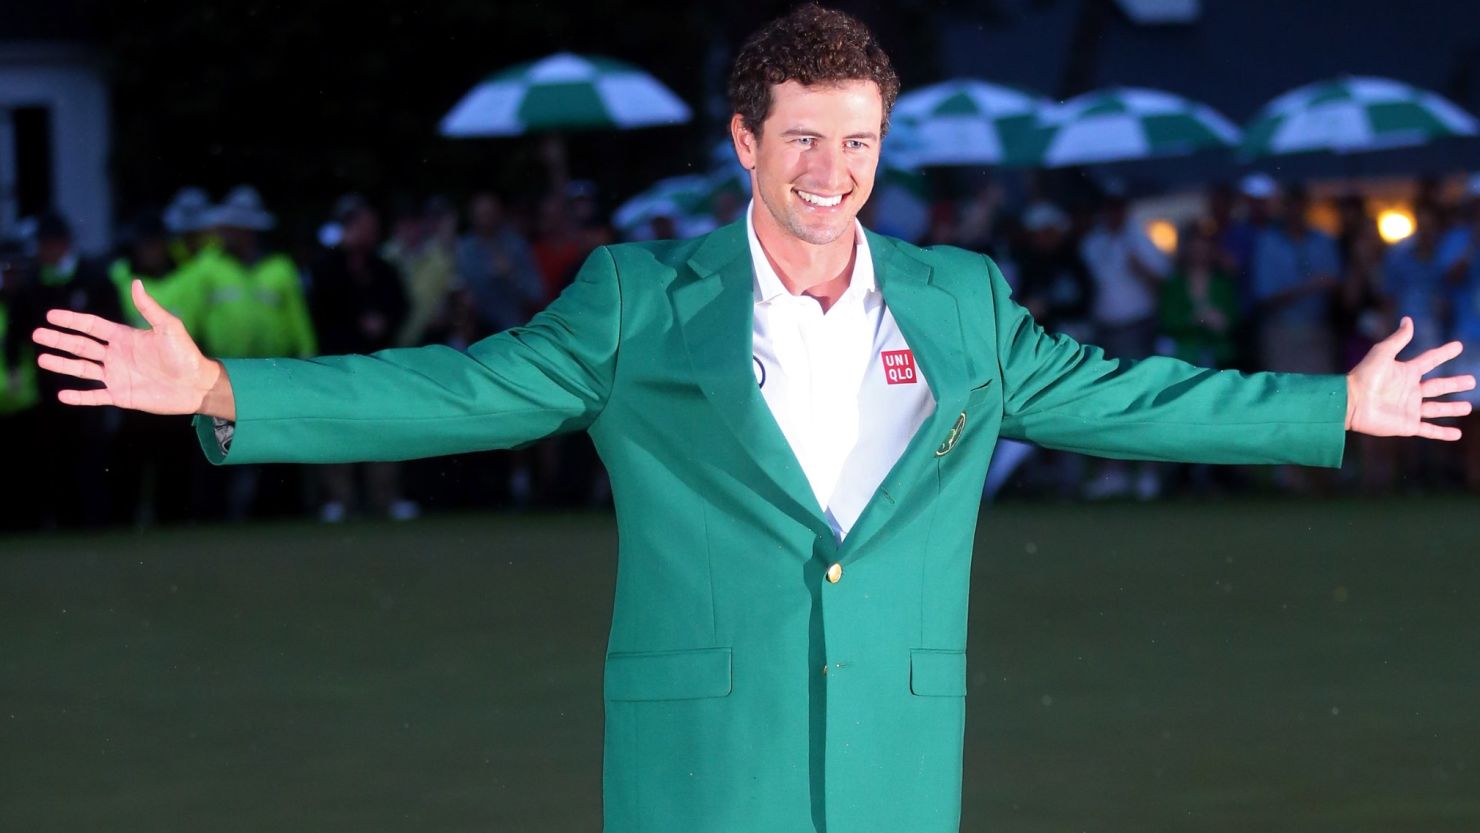 Adam Scott became his country's first Masters champion with his playoff win at Augusta.